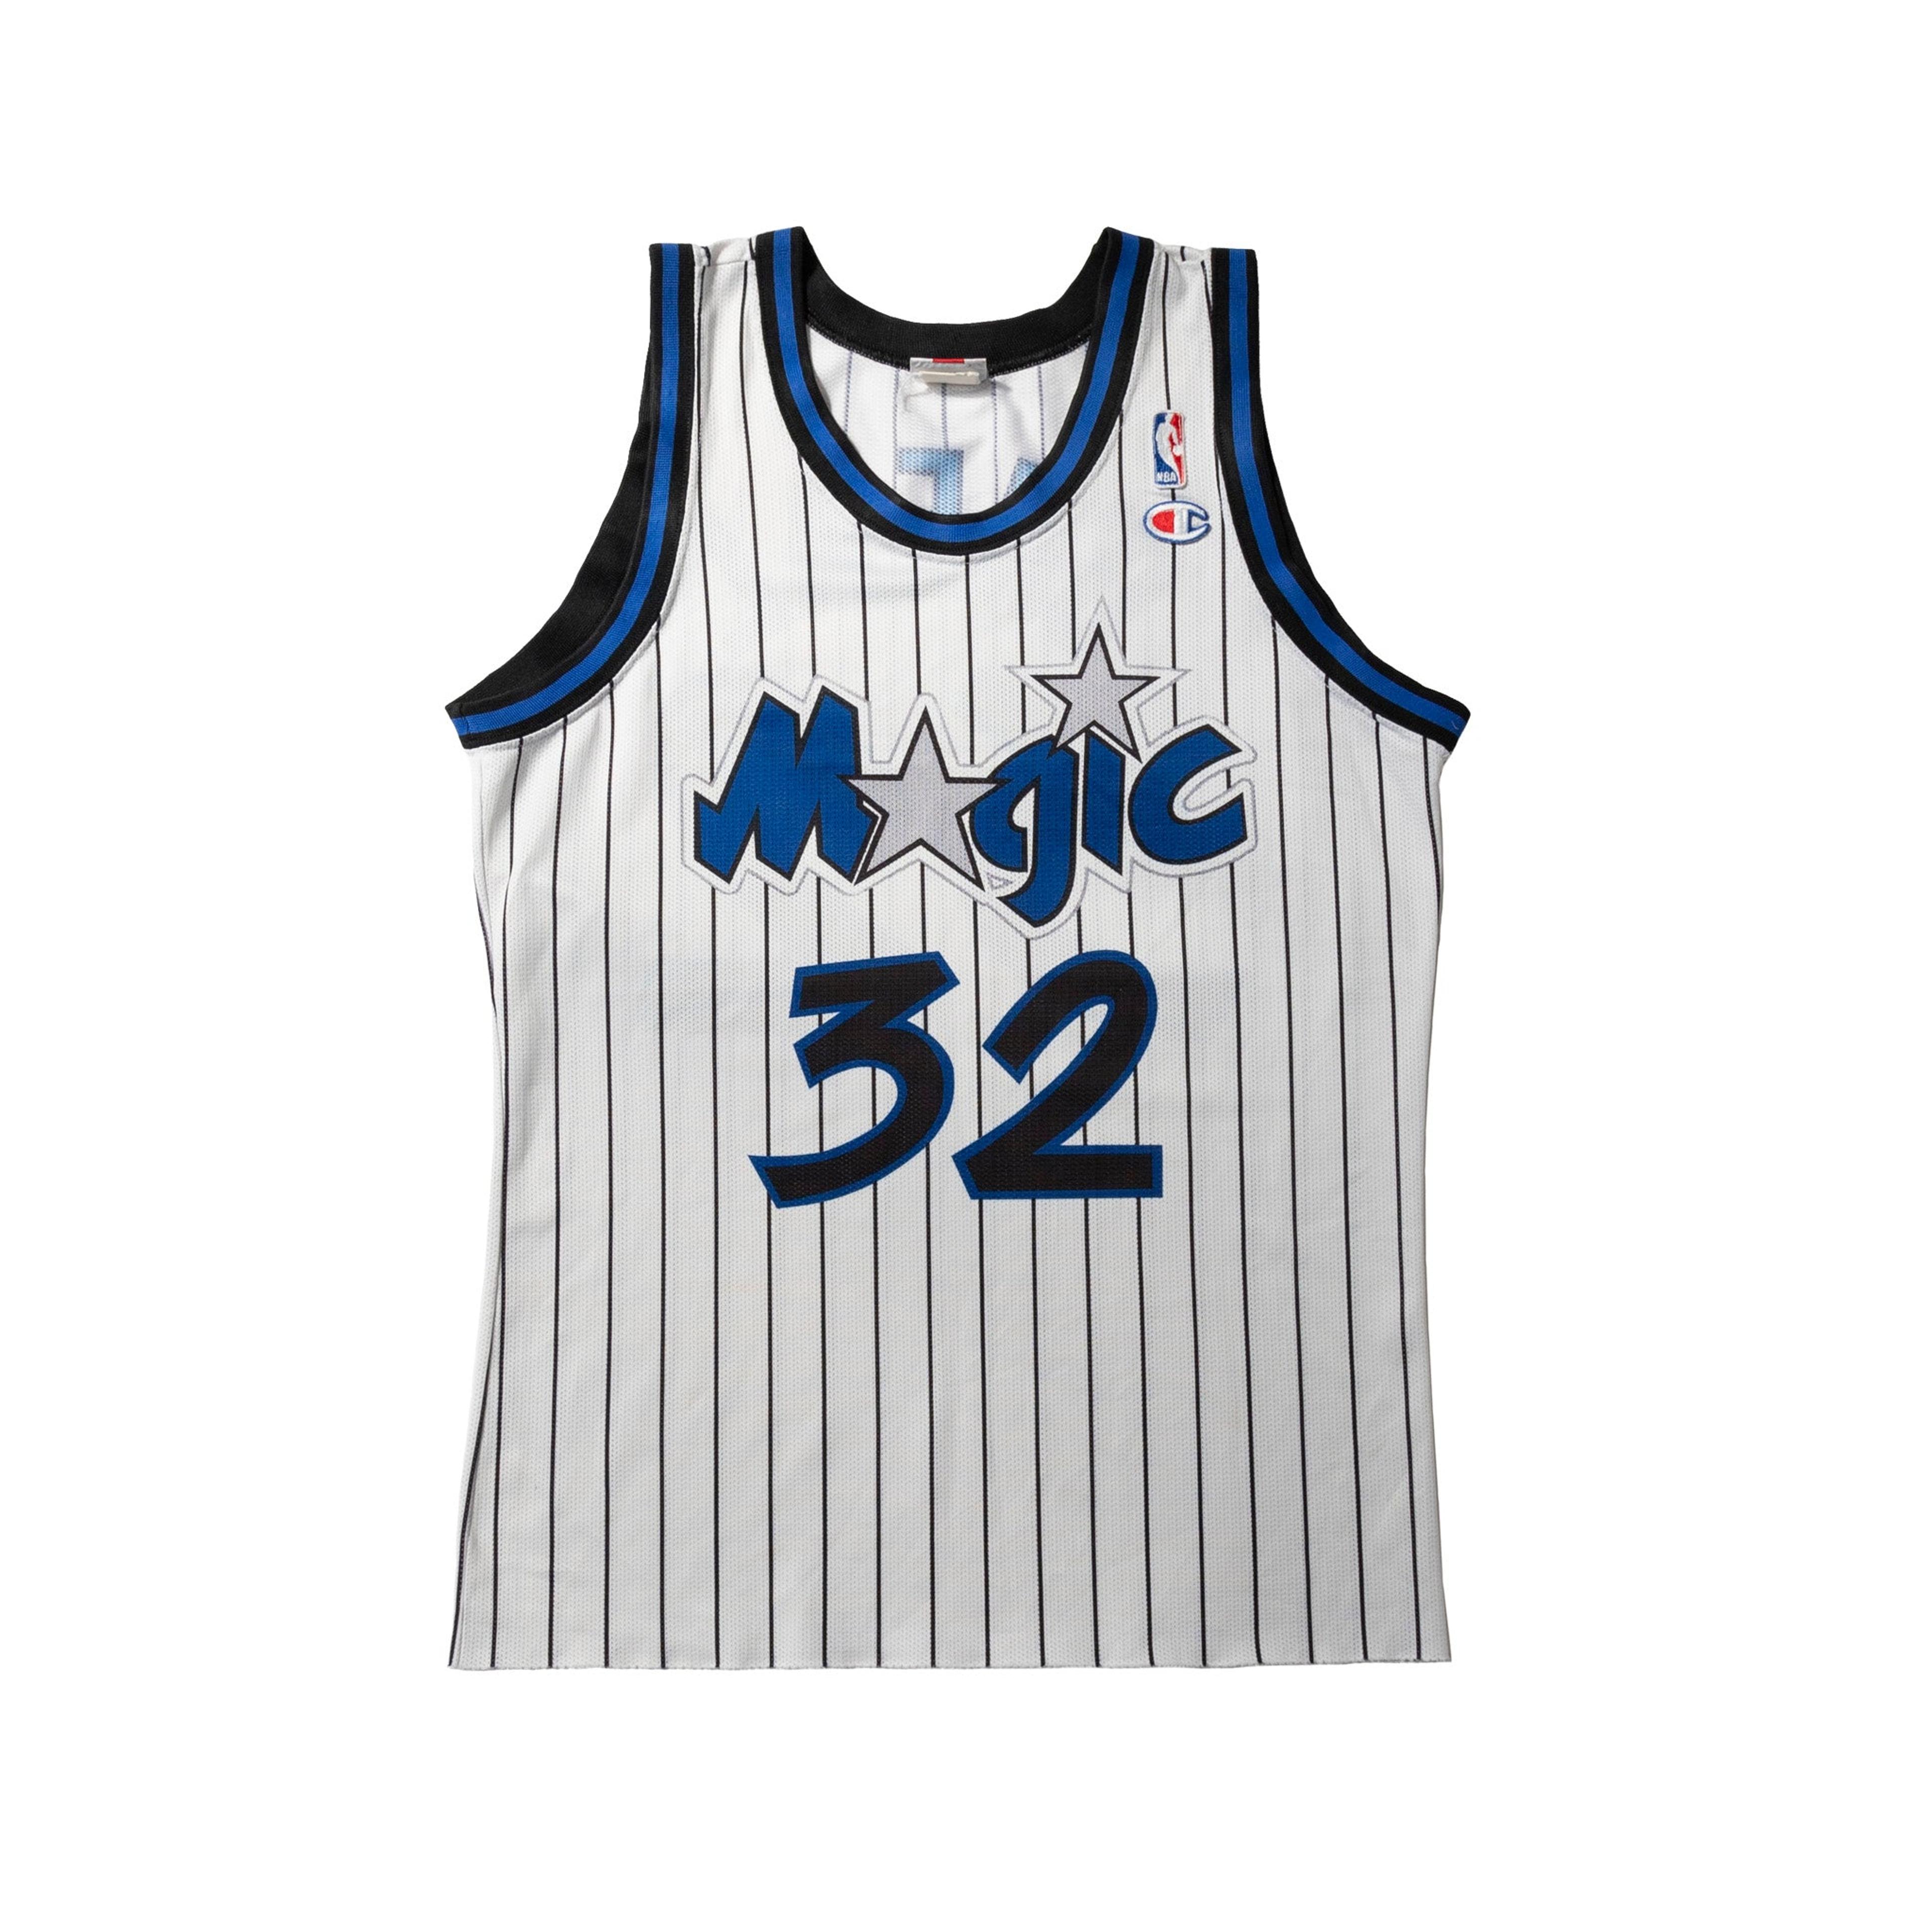 Shaquille O'Neal Champion NBA Rare Vintage Jersey